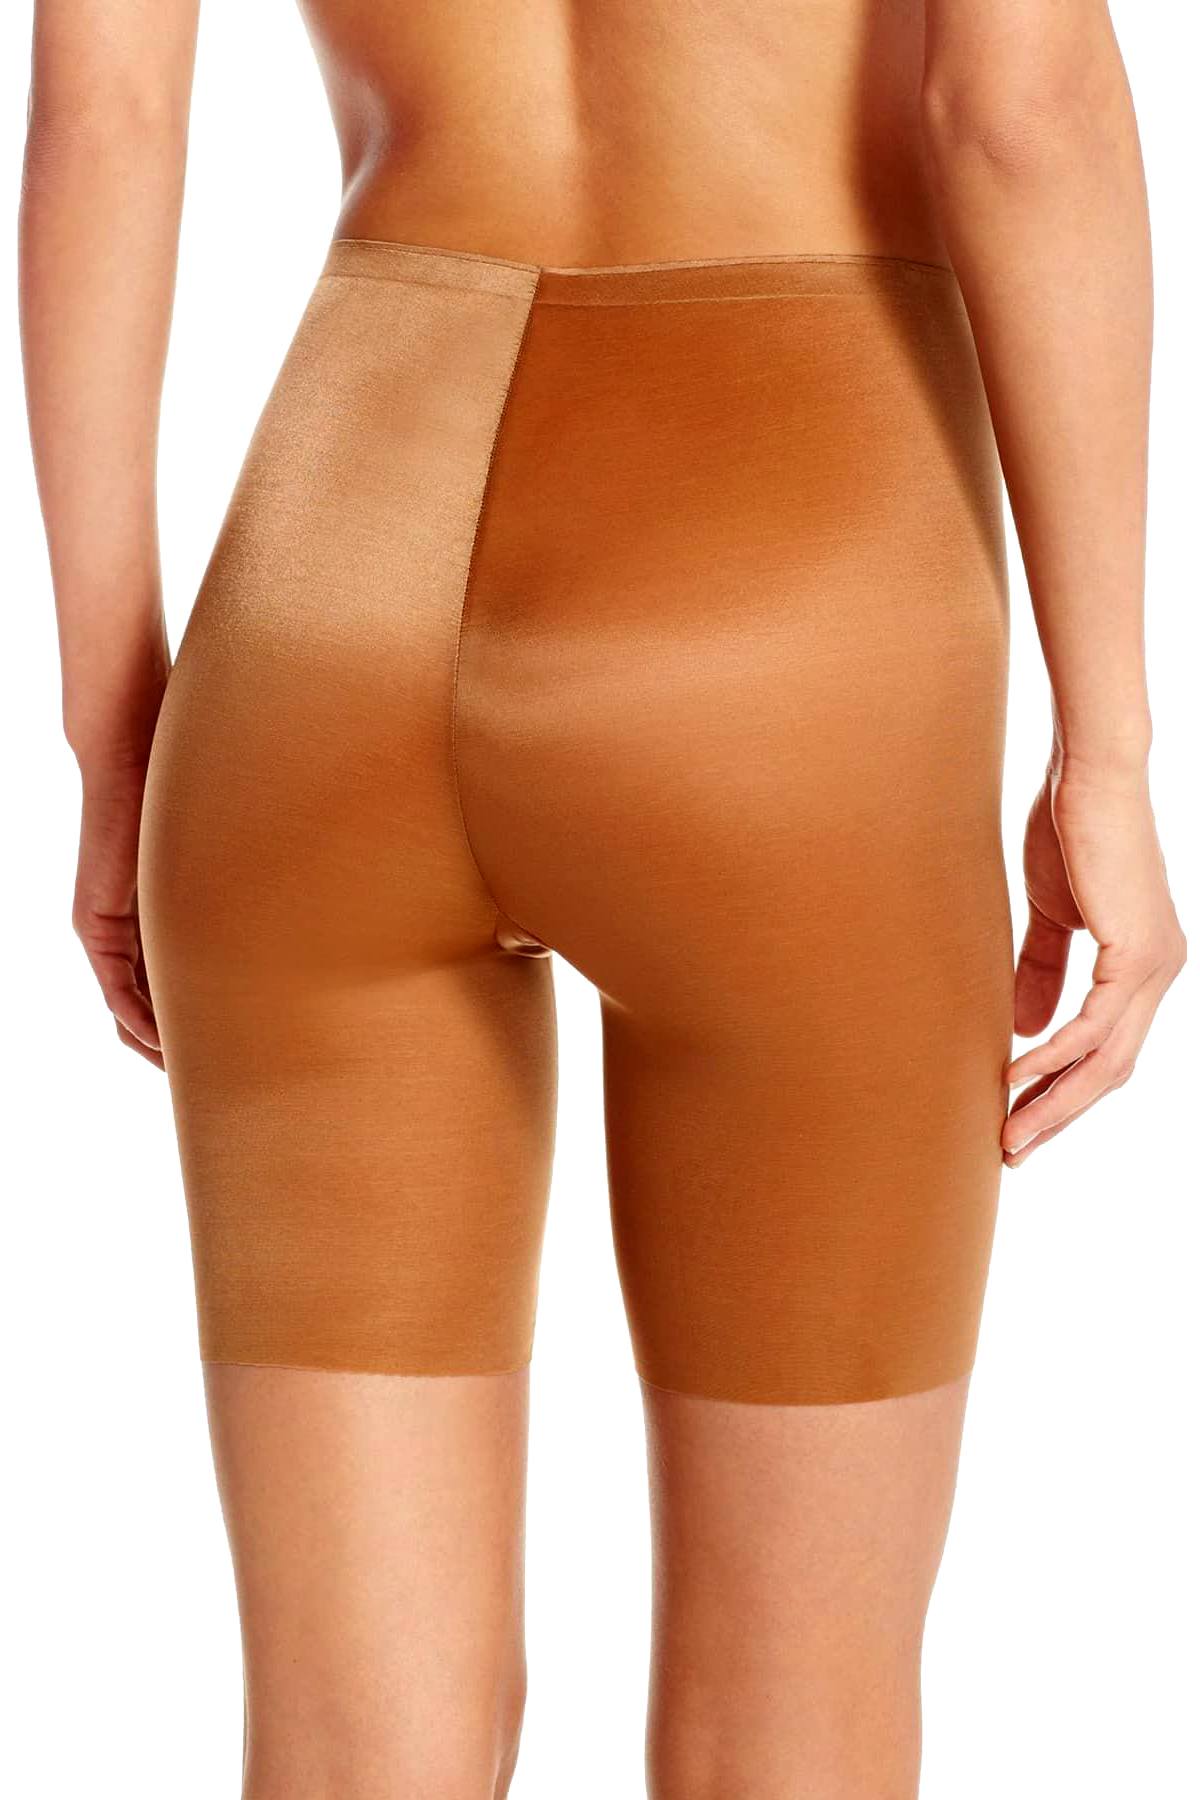 Spanx Skinny Britches Mid Thigh Short in Naked 3.0